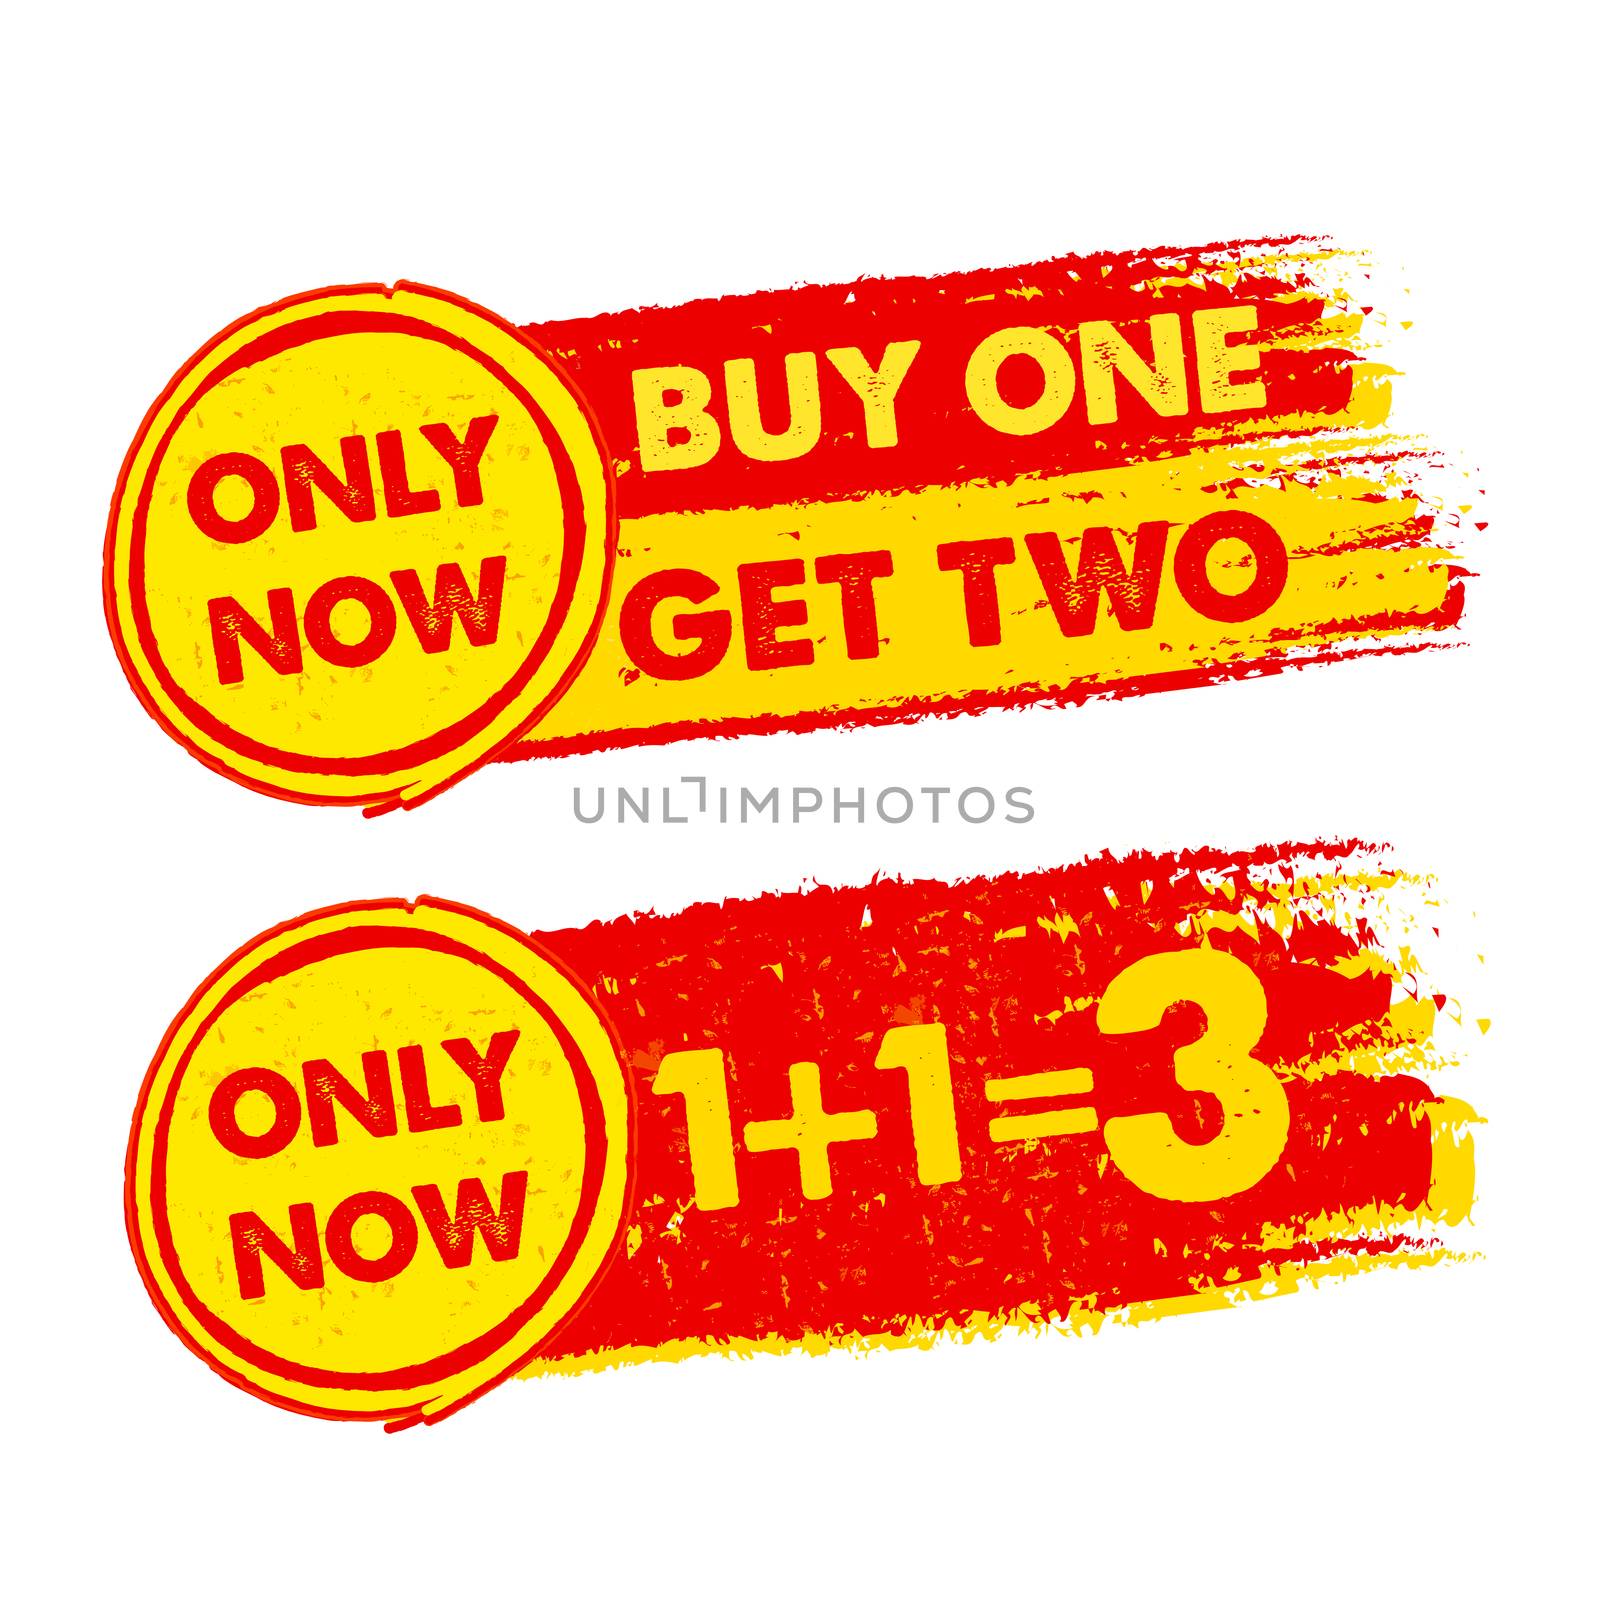 only now, buy one get two, 1 plus 1 is 3 banners - text in yellow and red drawn labels with symbols, business commerce shopping concept